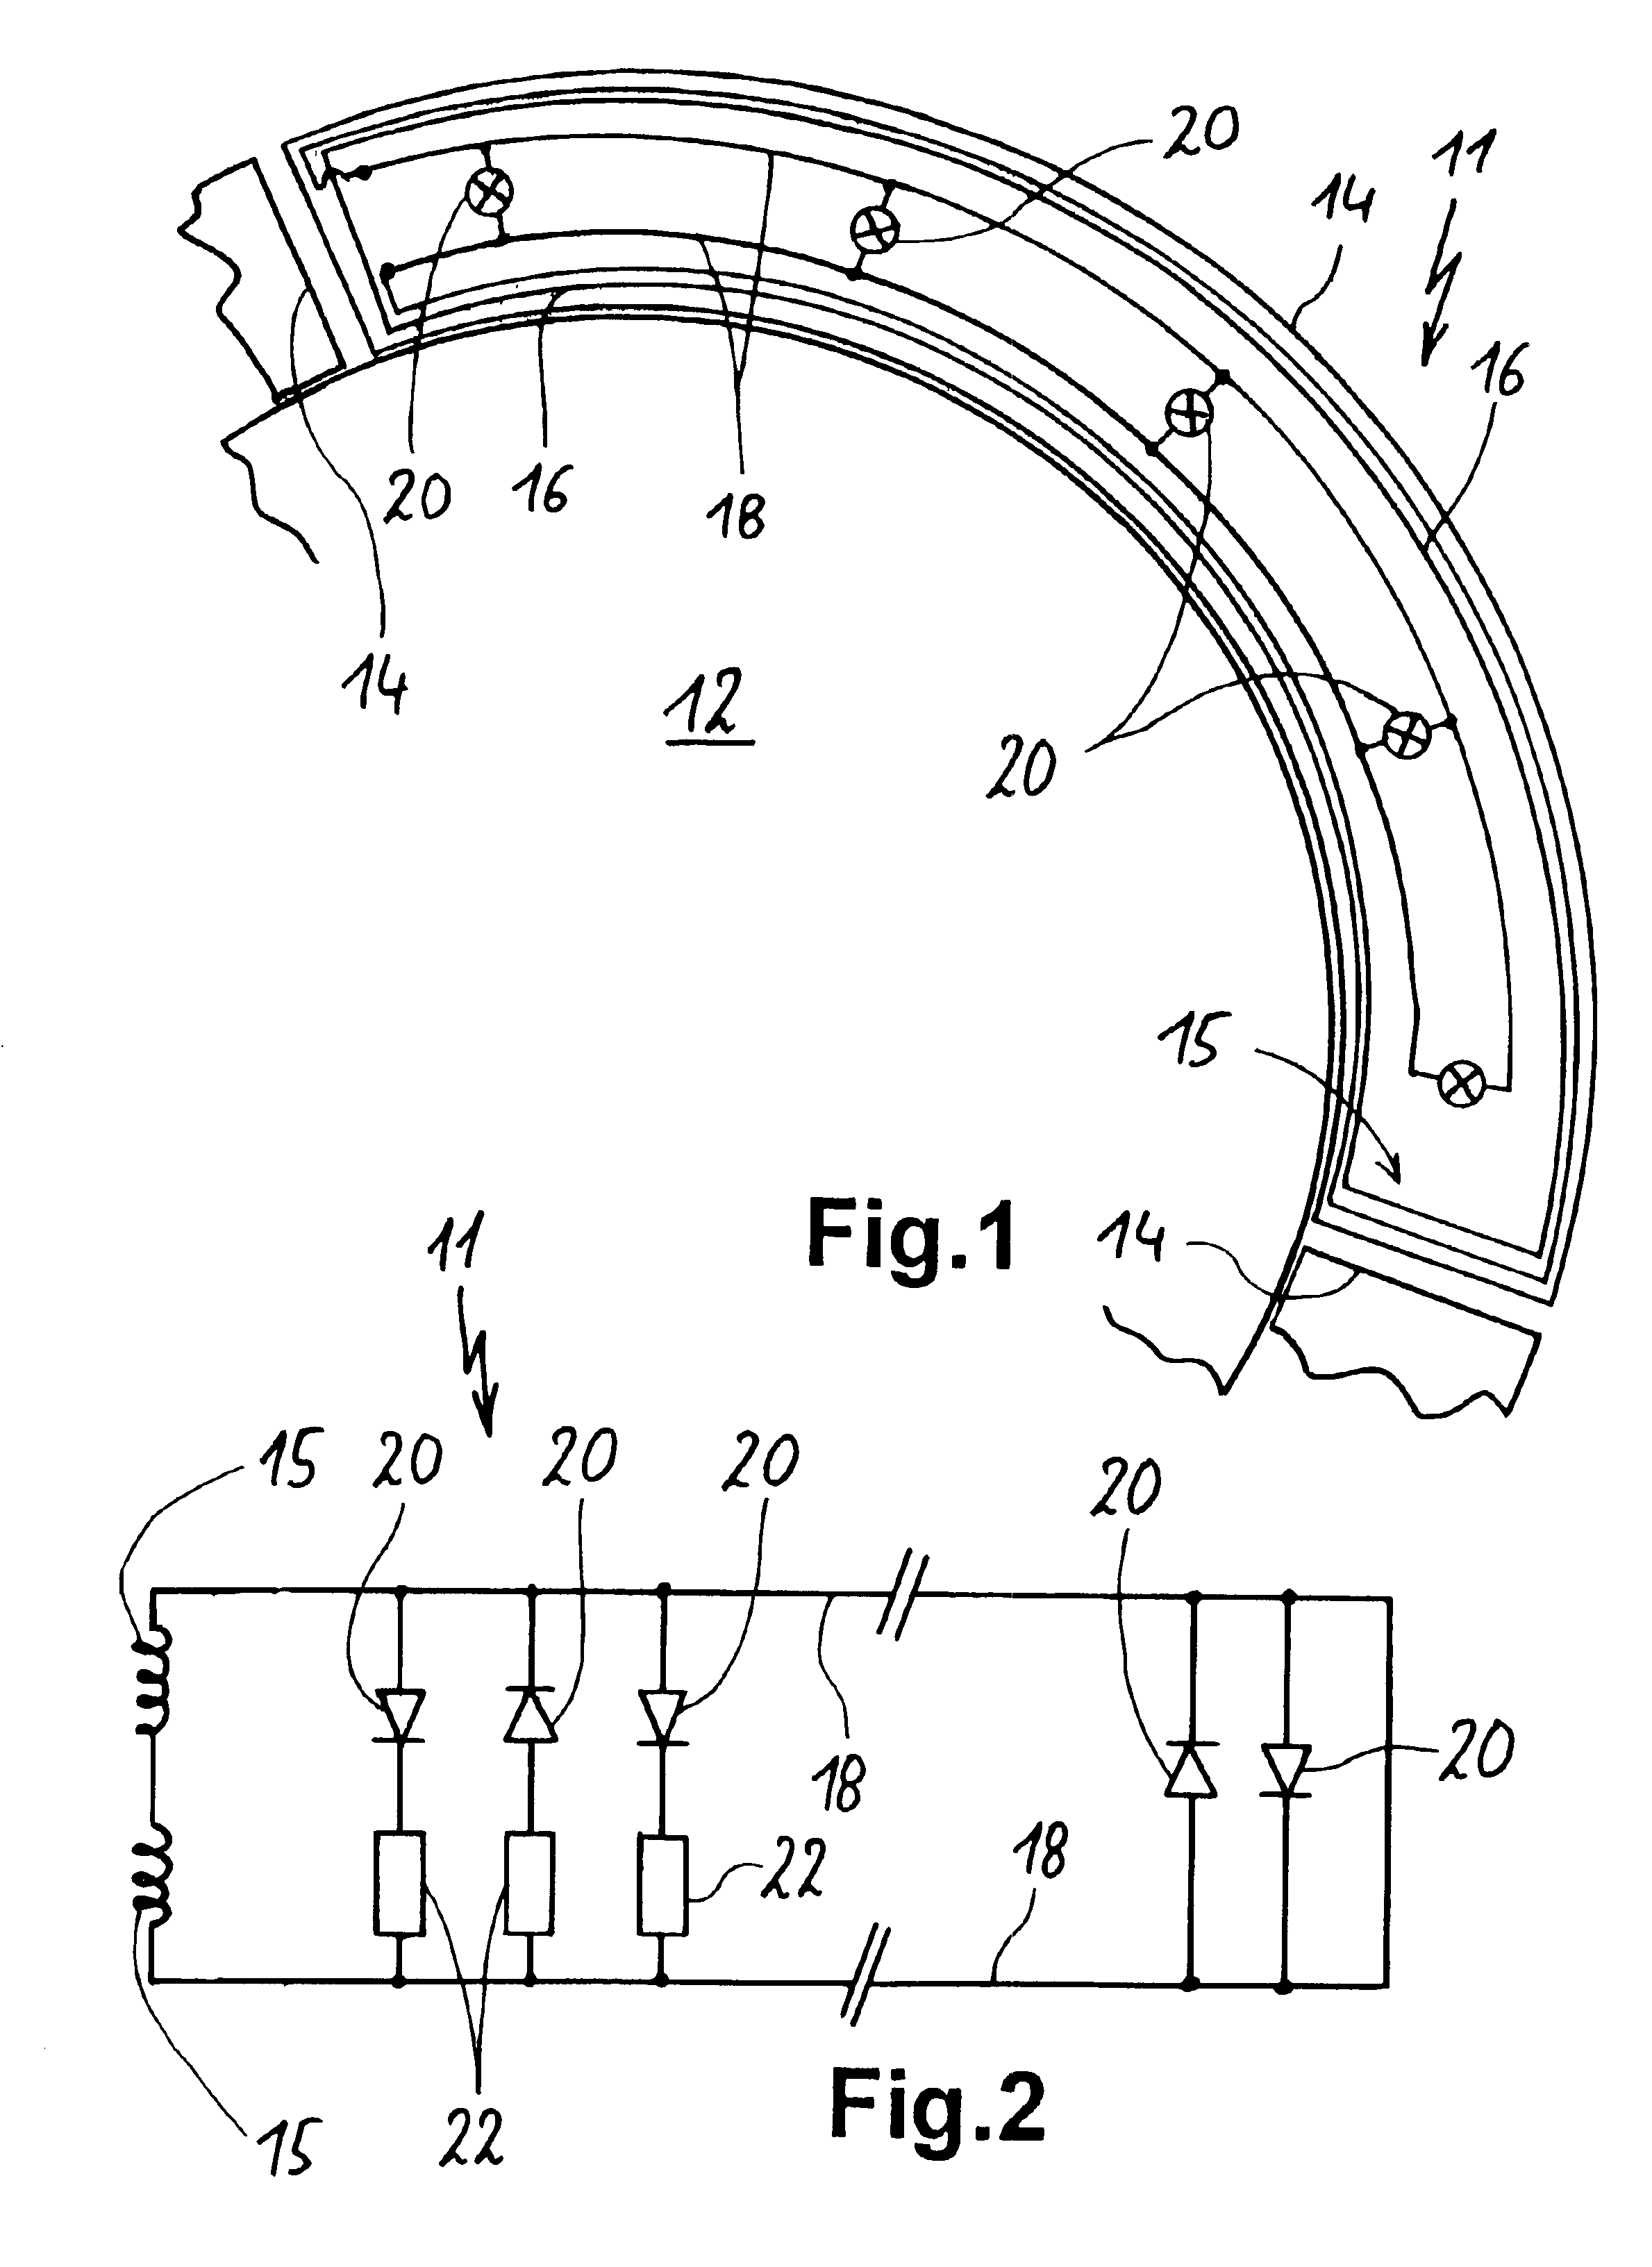 Apparatus for marking the operation of an induction coil by illumination